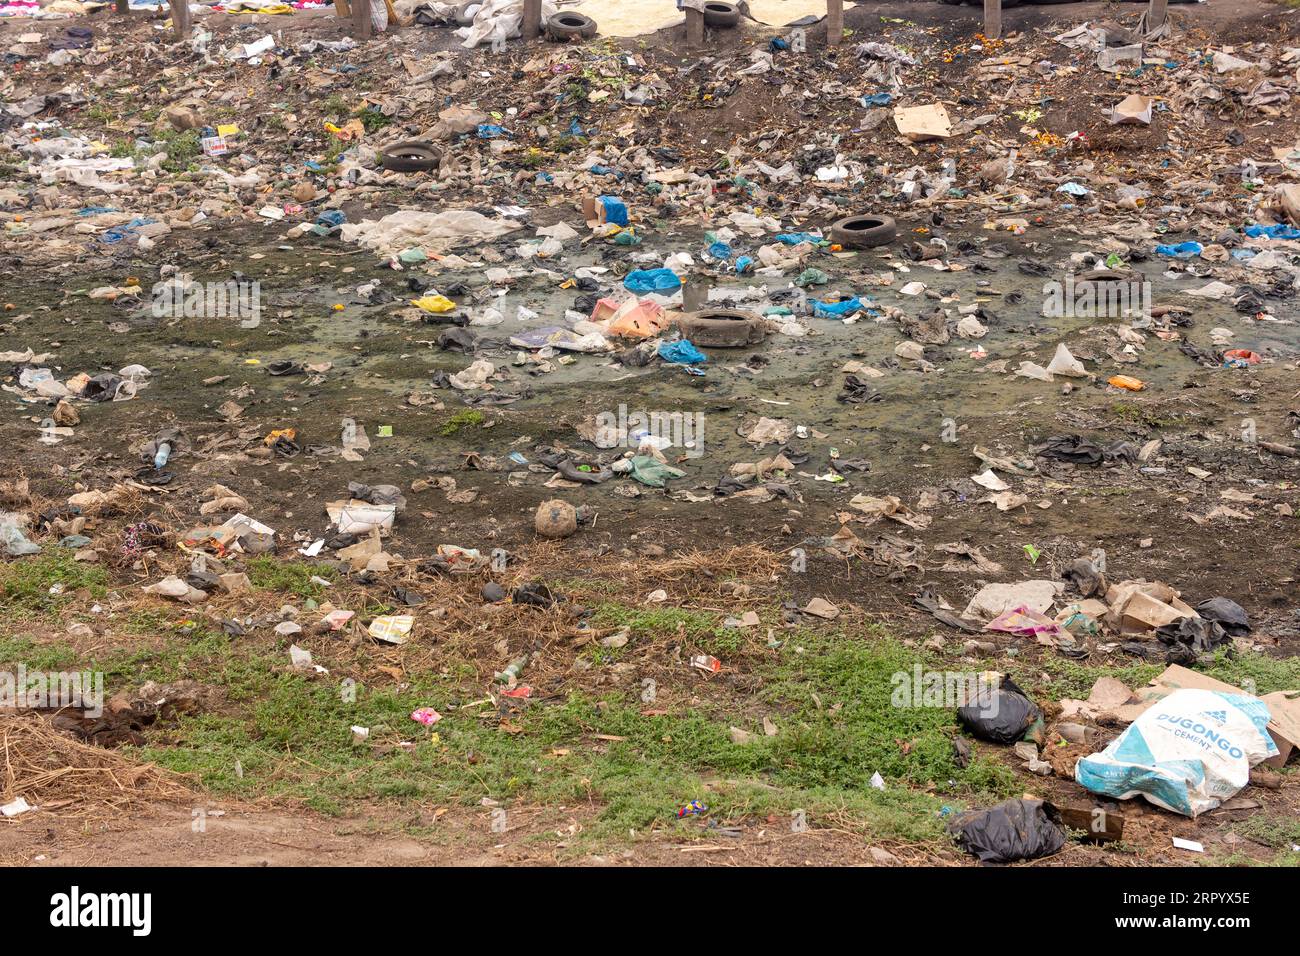 Waste-Filled Valley Near Main Road with Discarded Plastic Packaging, Stagnant Water, and Old Tires Stock Photo